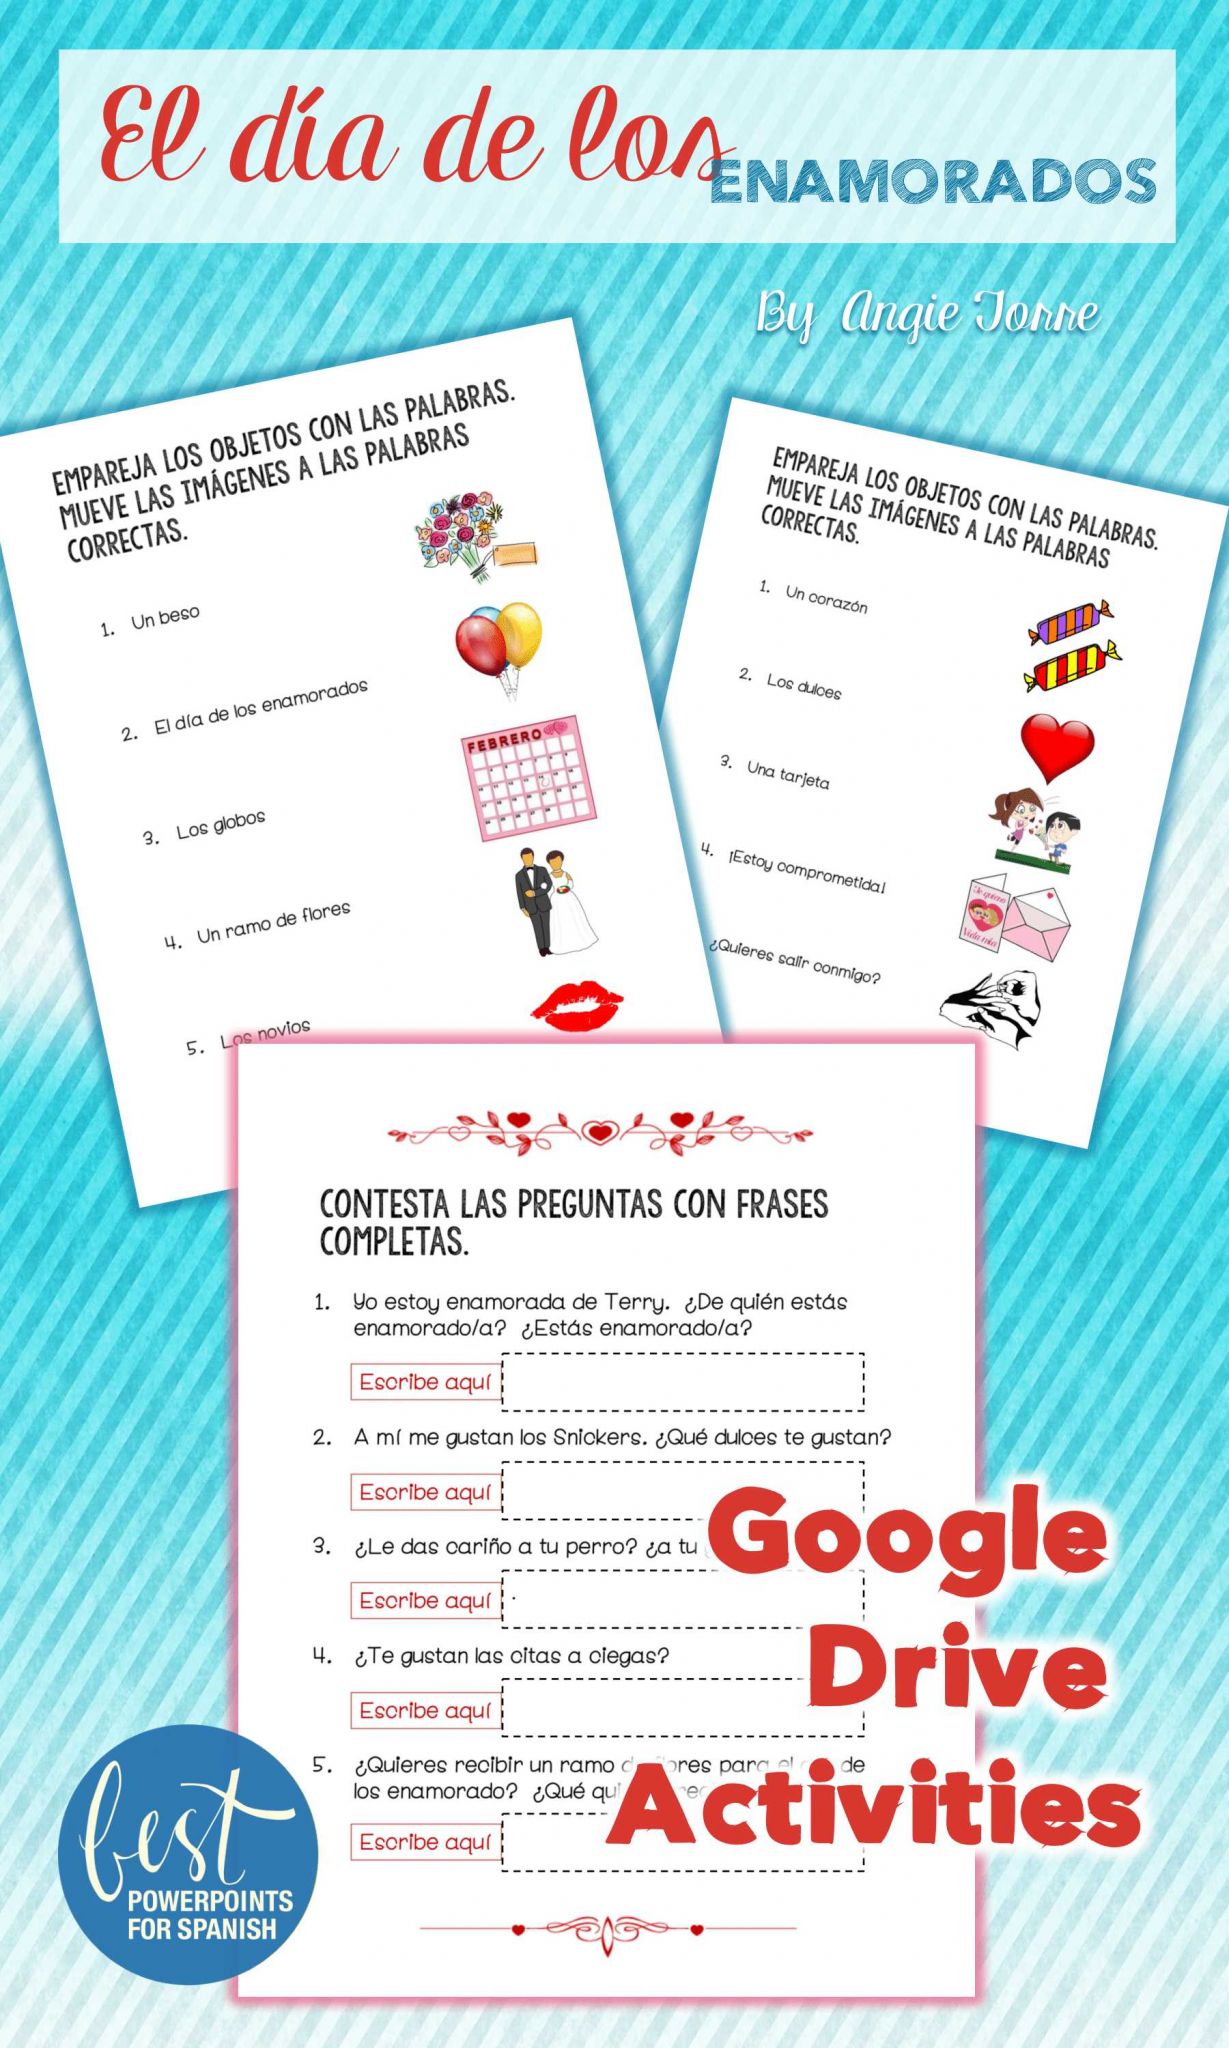 Writing Complete Sentences Worksheets Along with Spanish Google Drive Activities Valentine S Day Vocabulary San